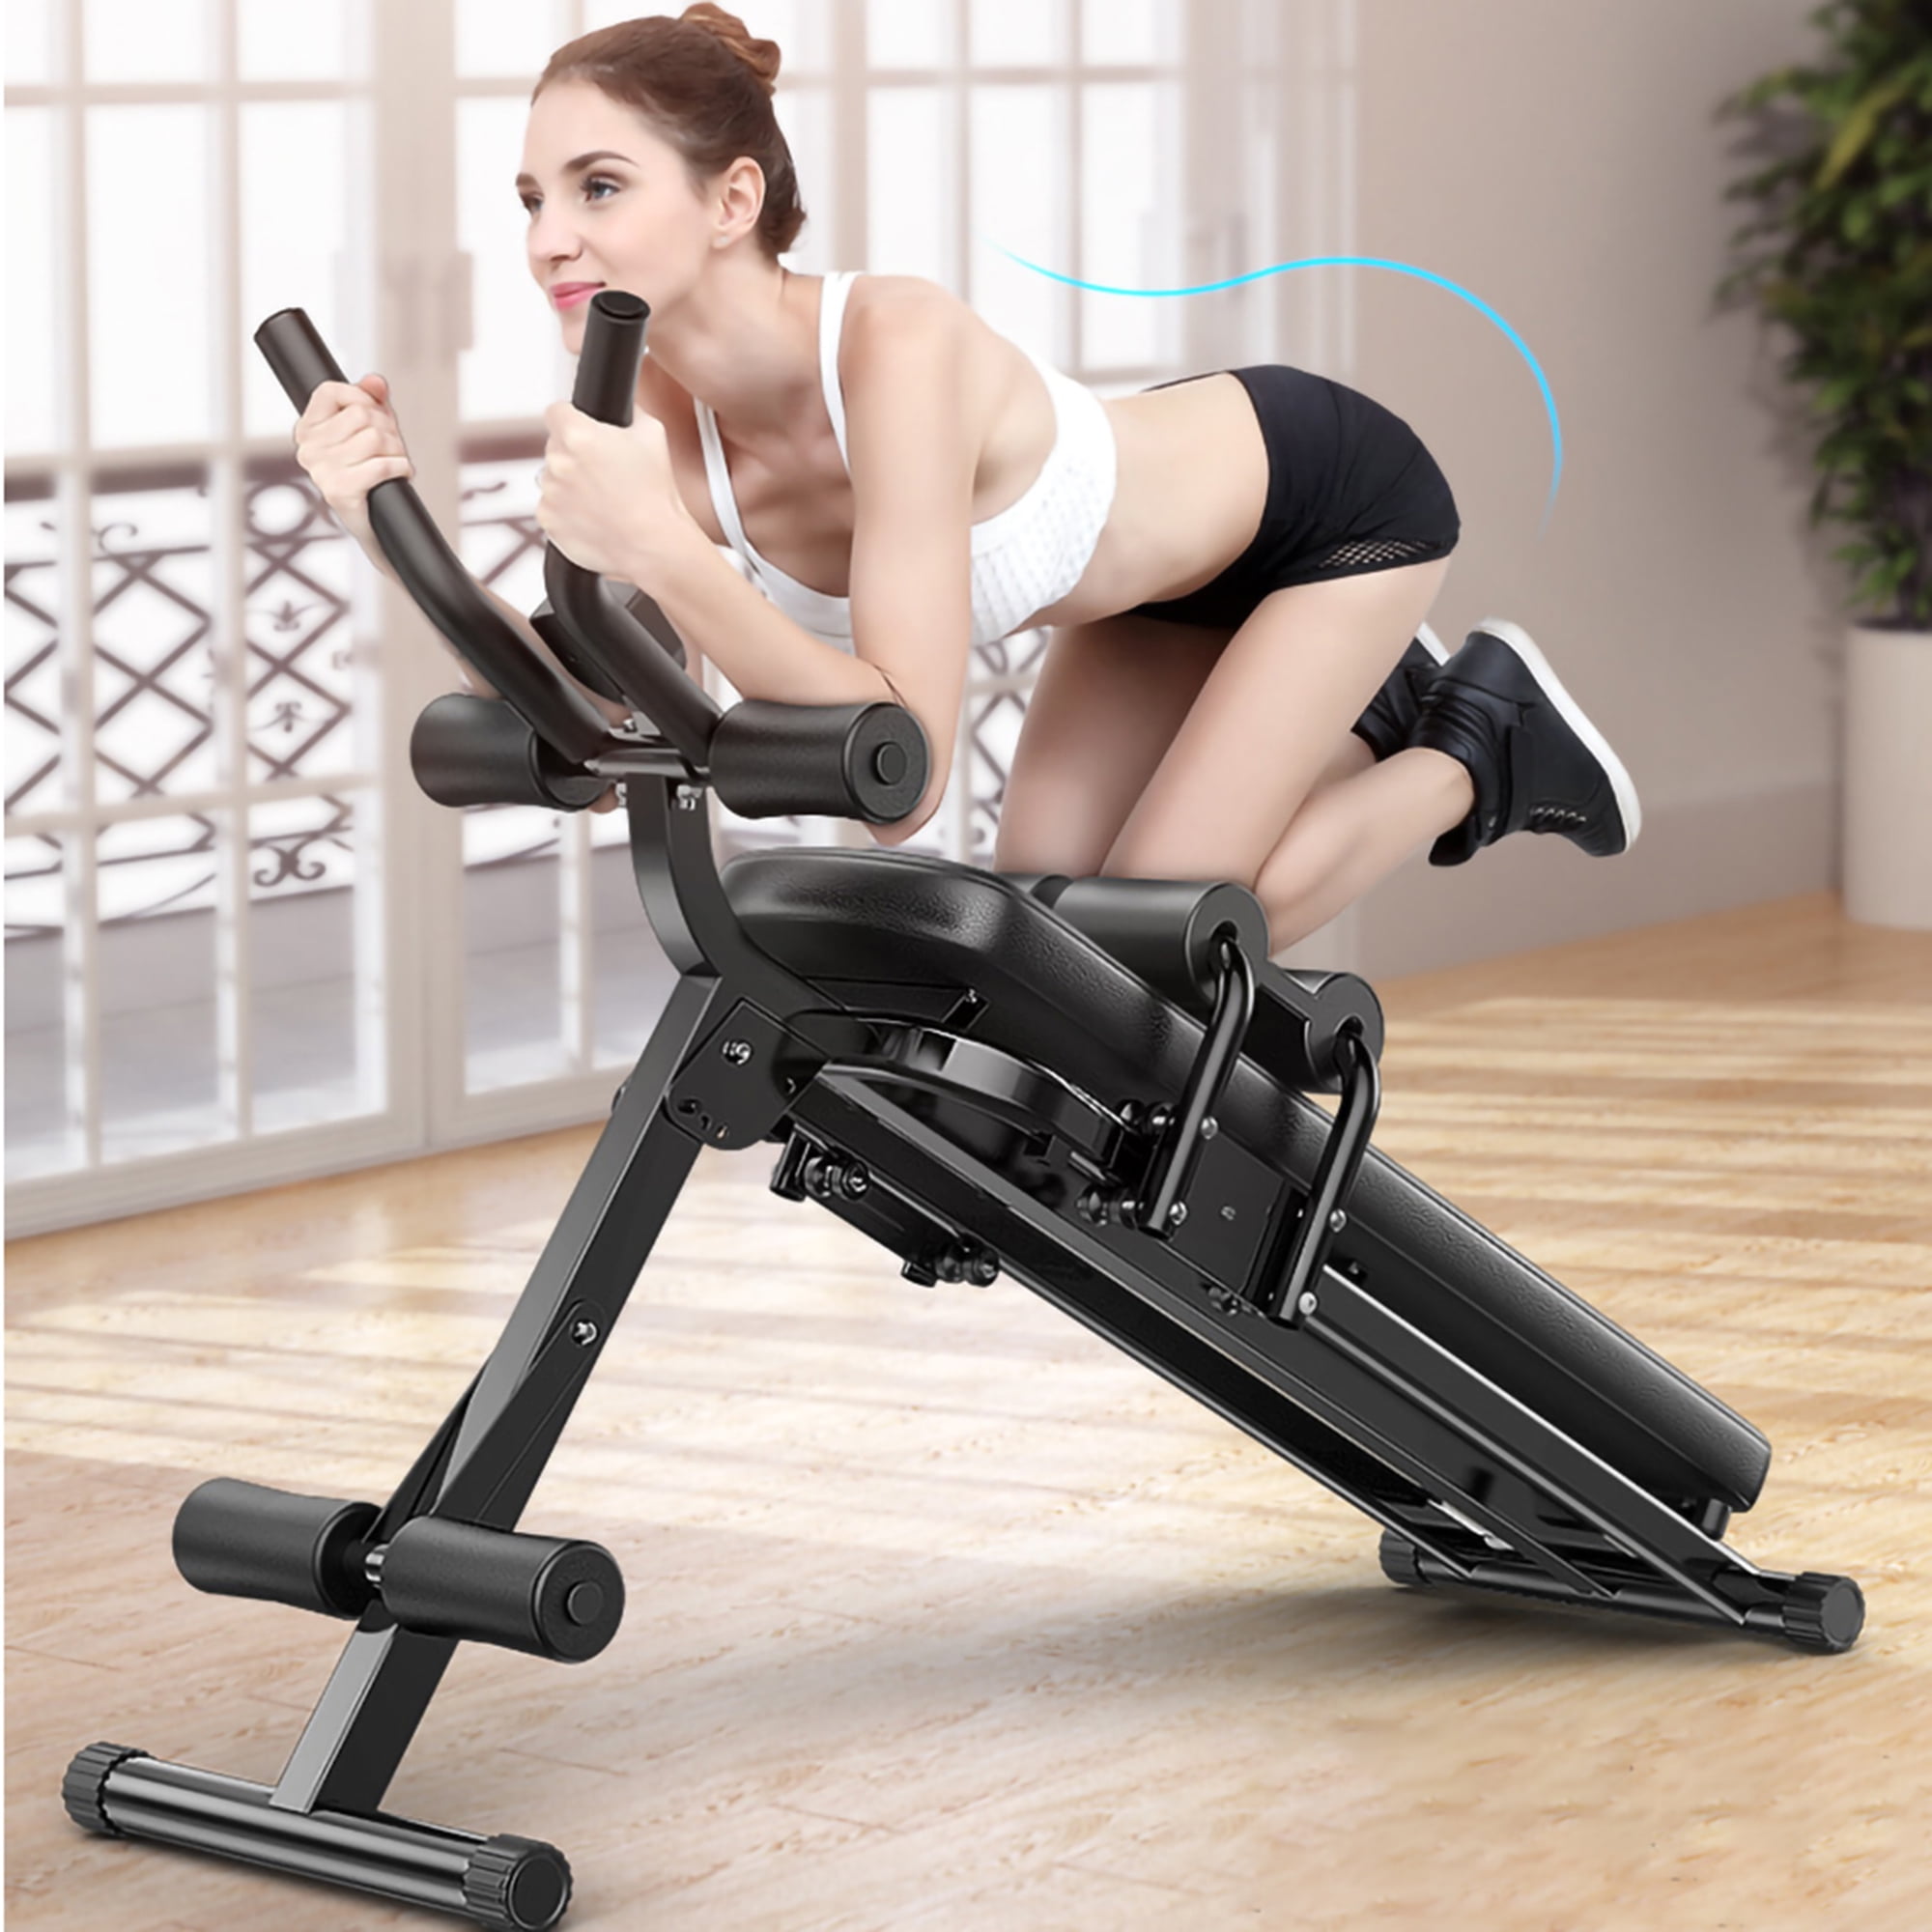 Foldable Decline Sit Up Bench Crunch Board Fitness Home Gym Exercise Sport 